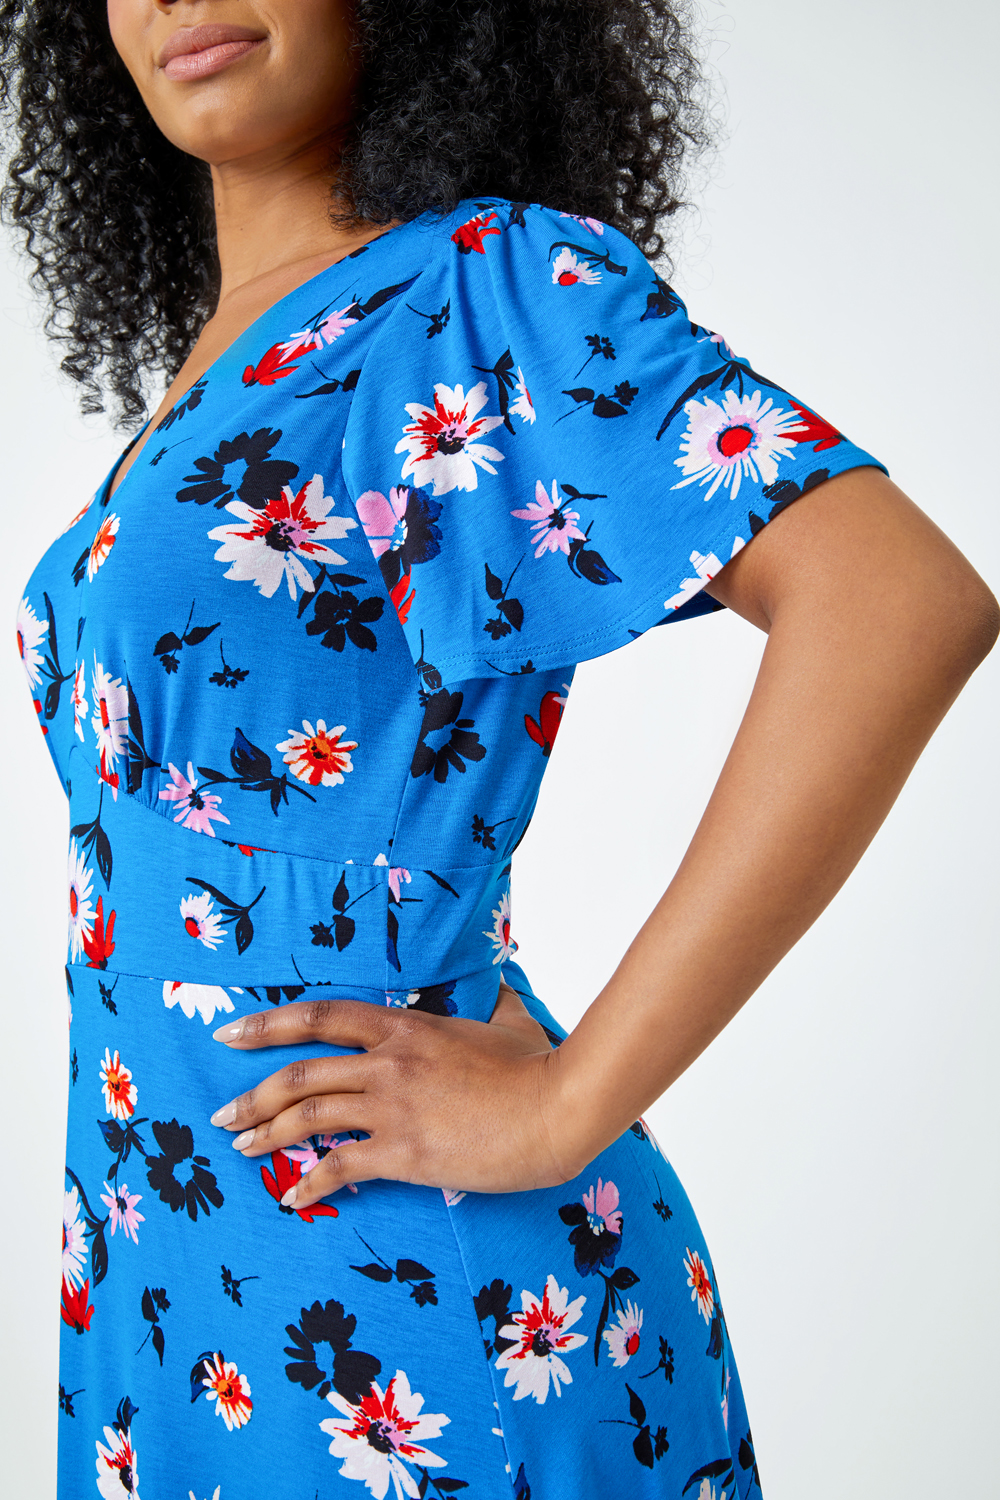 Turquoise Petite Floral Print Stretch Dress, Image 5 of 5